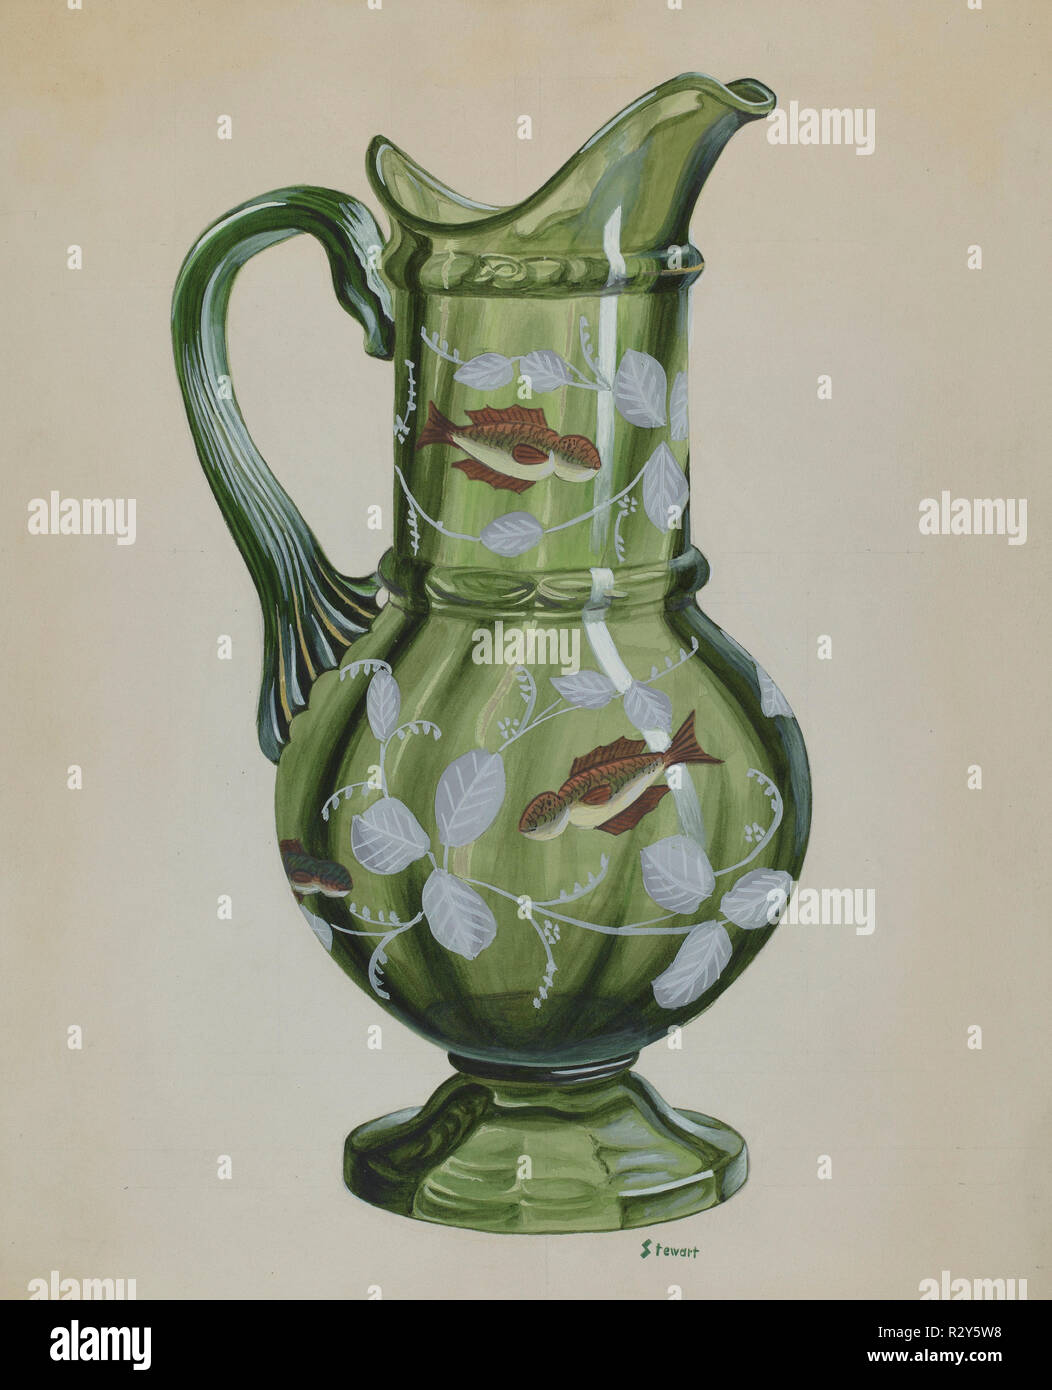 Green Pitcher. Dated: c. 1937. Medium: watercolor, graphite, and gouache on paper. Museum: National Gallery of Art, Washington DC. Author: Robert Stewart. Stock Photo